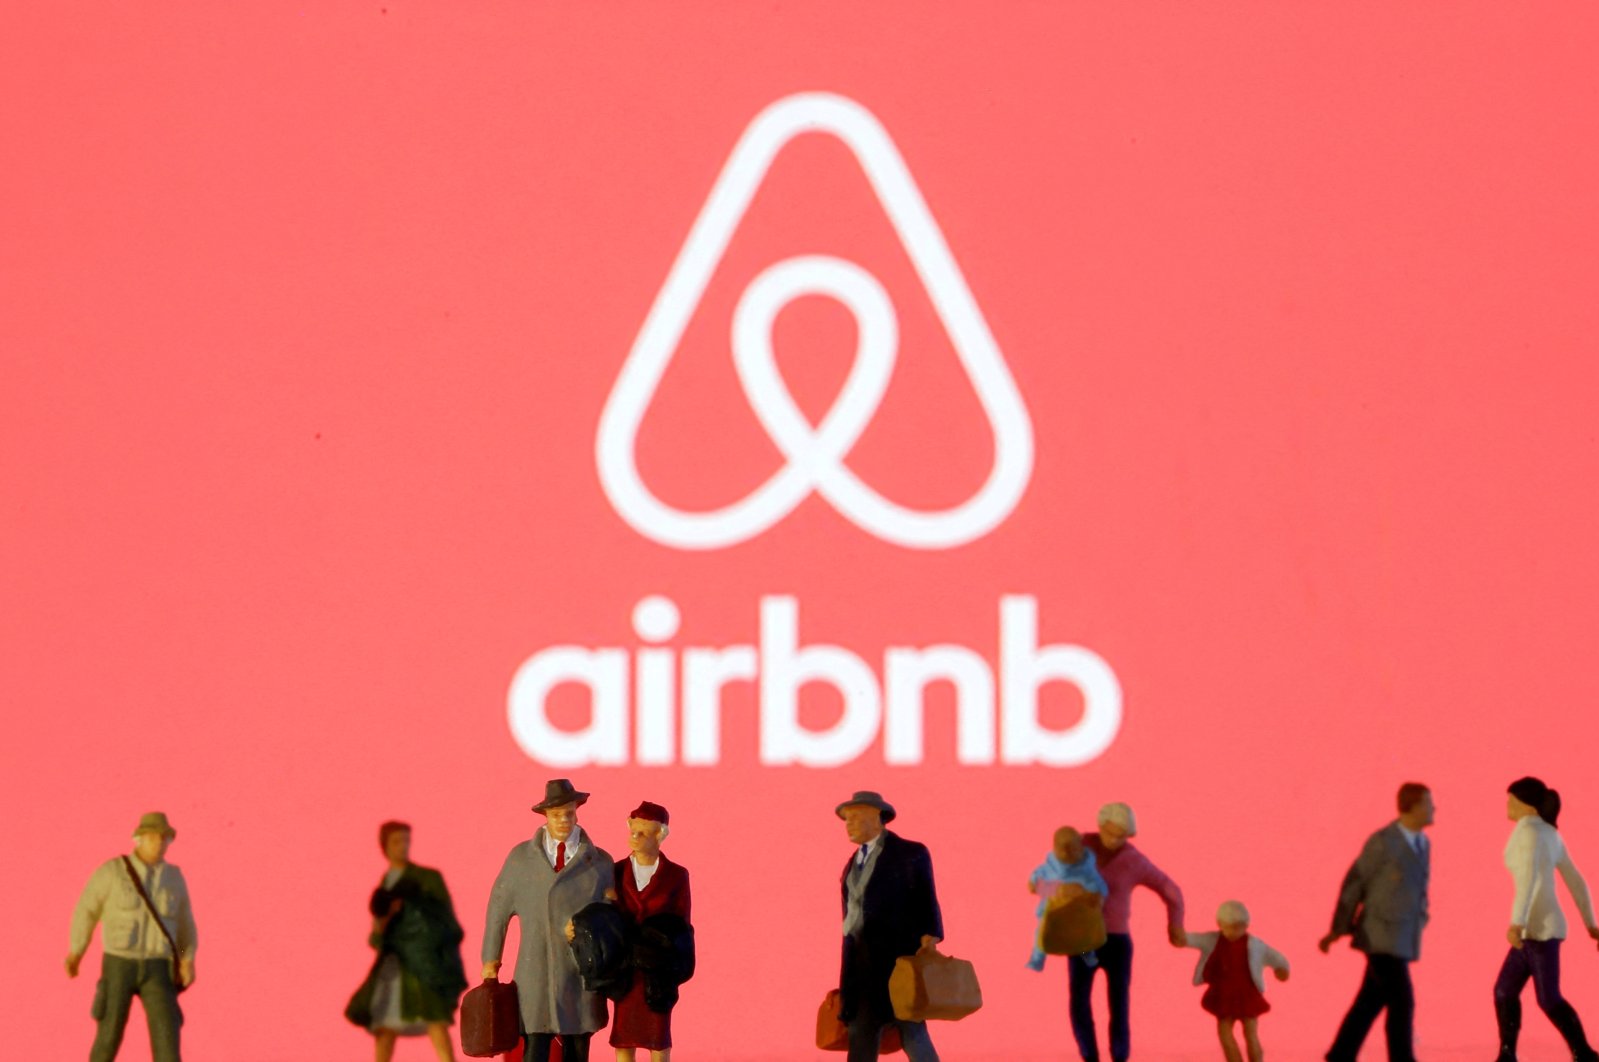 An Airbnb logo is displayed with small toy figures, March 19, 2020. (Reuters Photo)